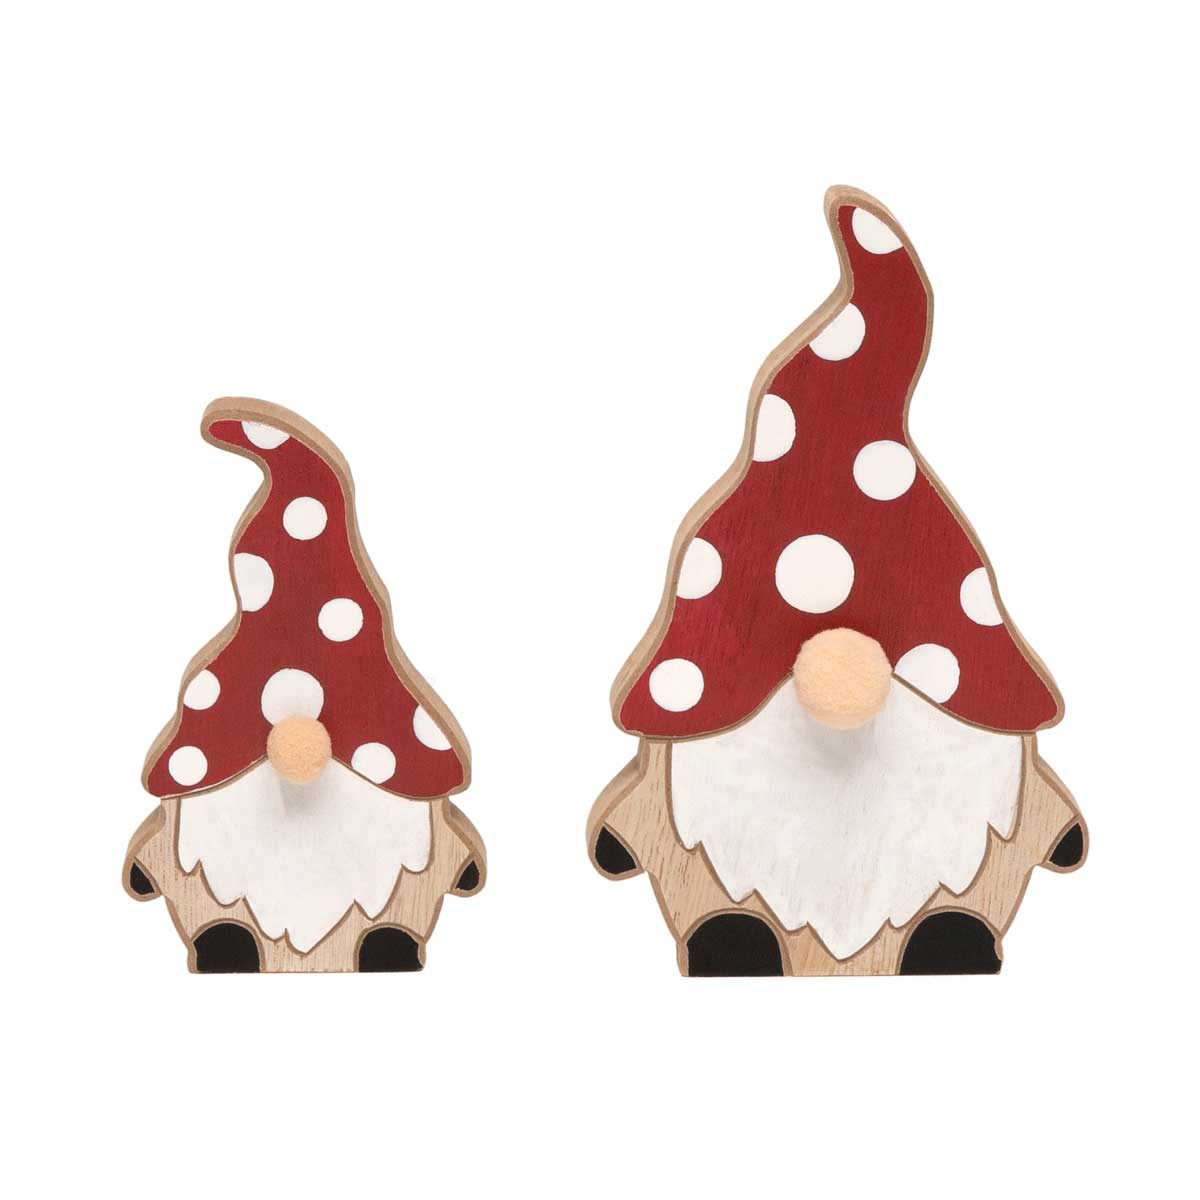 b50 SIT-A-BOUT GNOME POLKA DOT SMALL 3.25IN X.75IN X 5.25IN WOOD